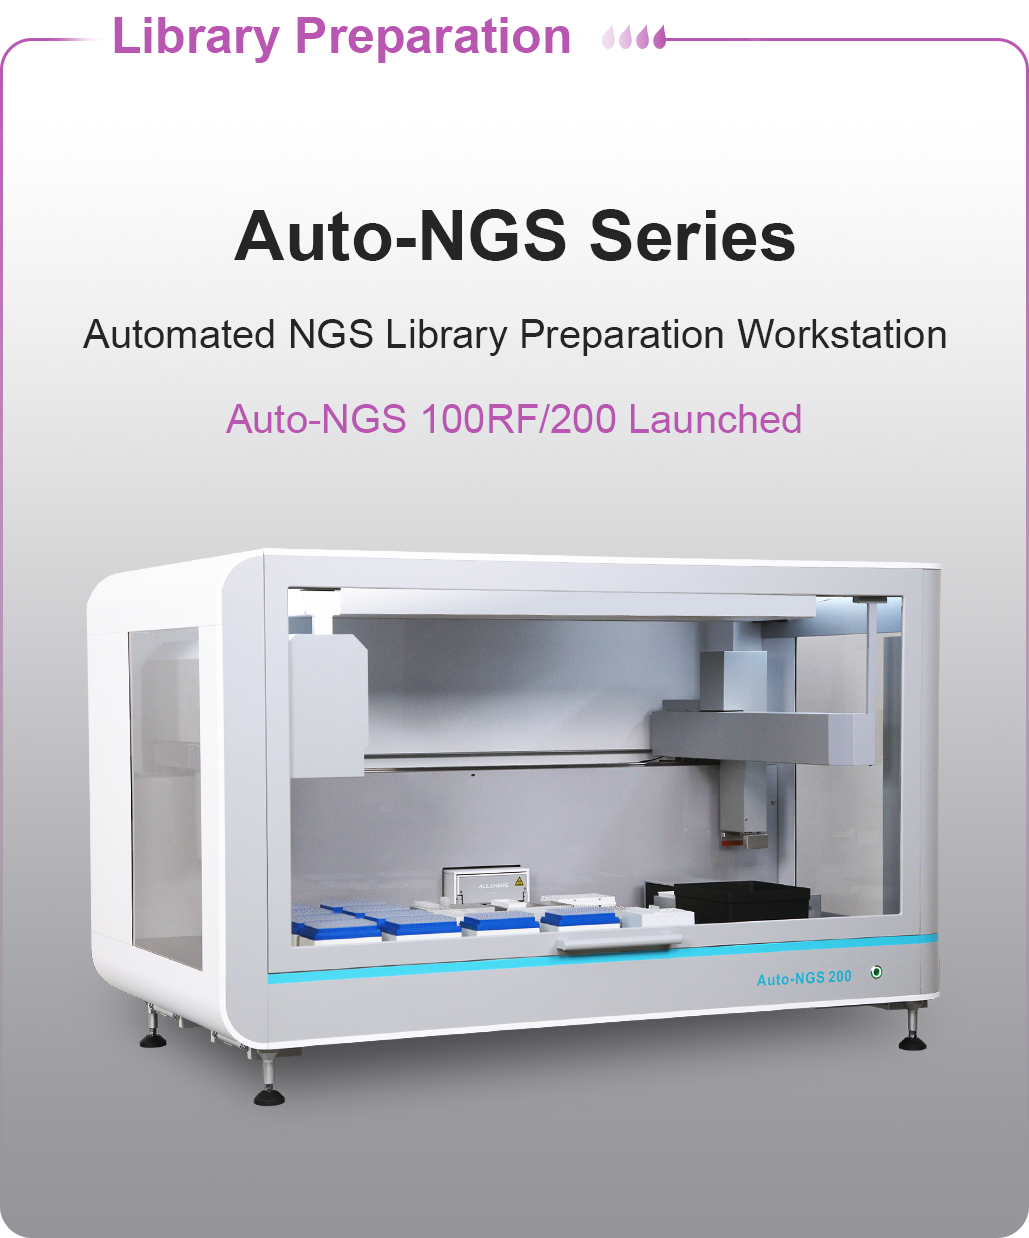 Auto-NGS Series. Automated NGS Library Preparation Workstation. Auto-NGS 100FR/200 Launched.